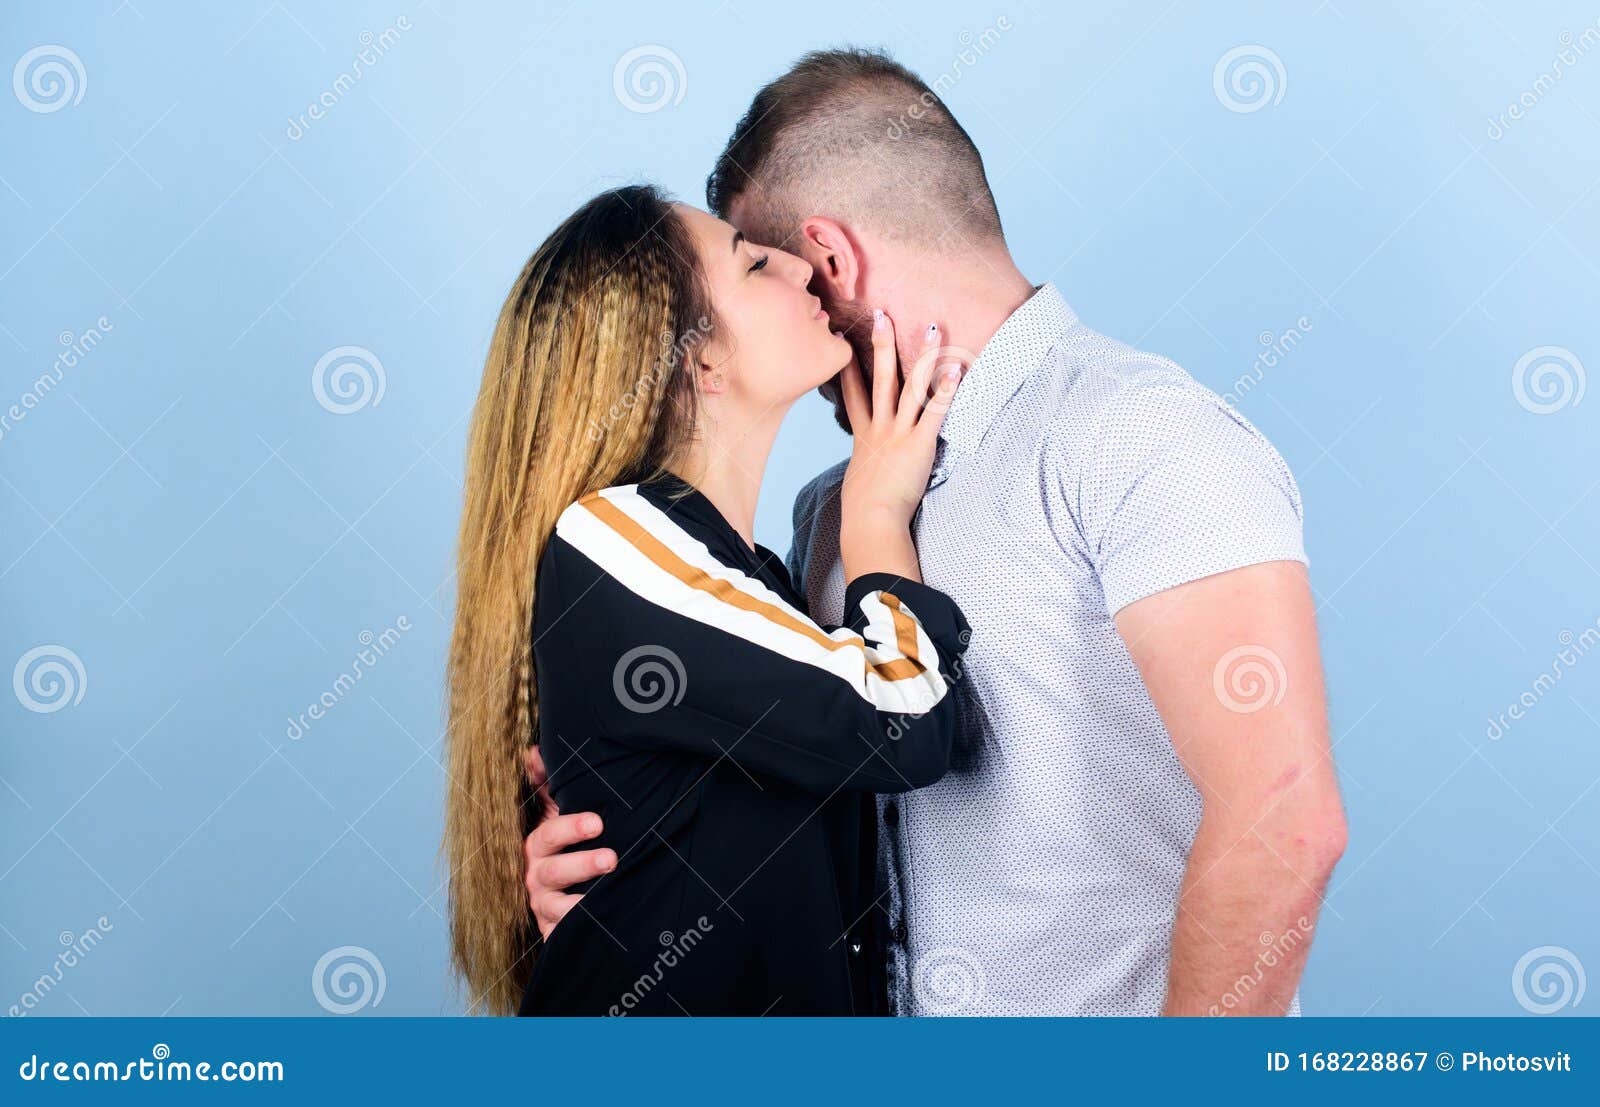 Couple in Love. Sharing Secrets. Couple Goals Concept. Man and ...